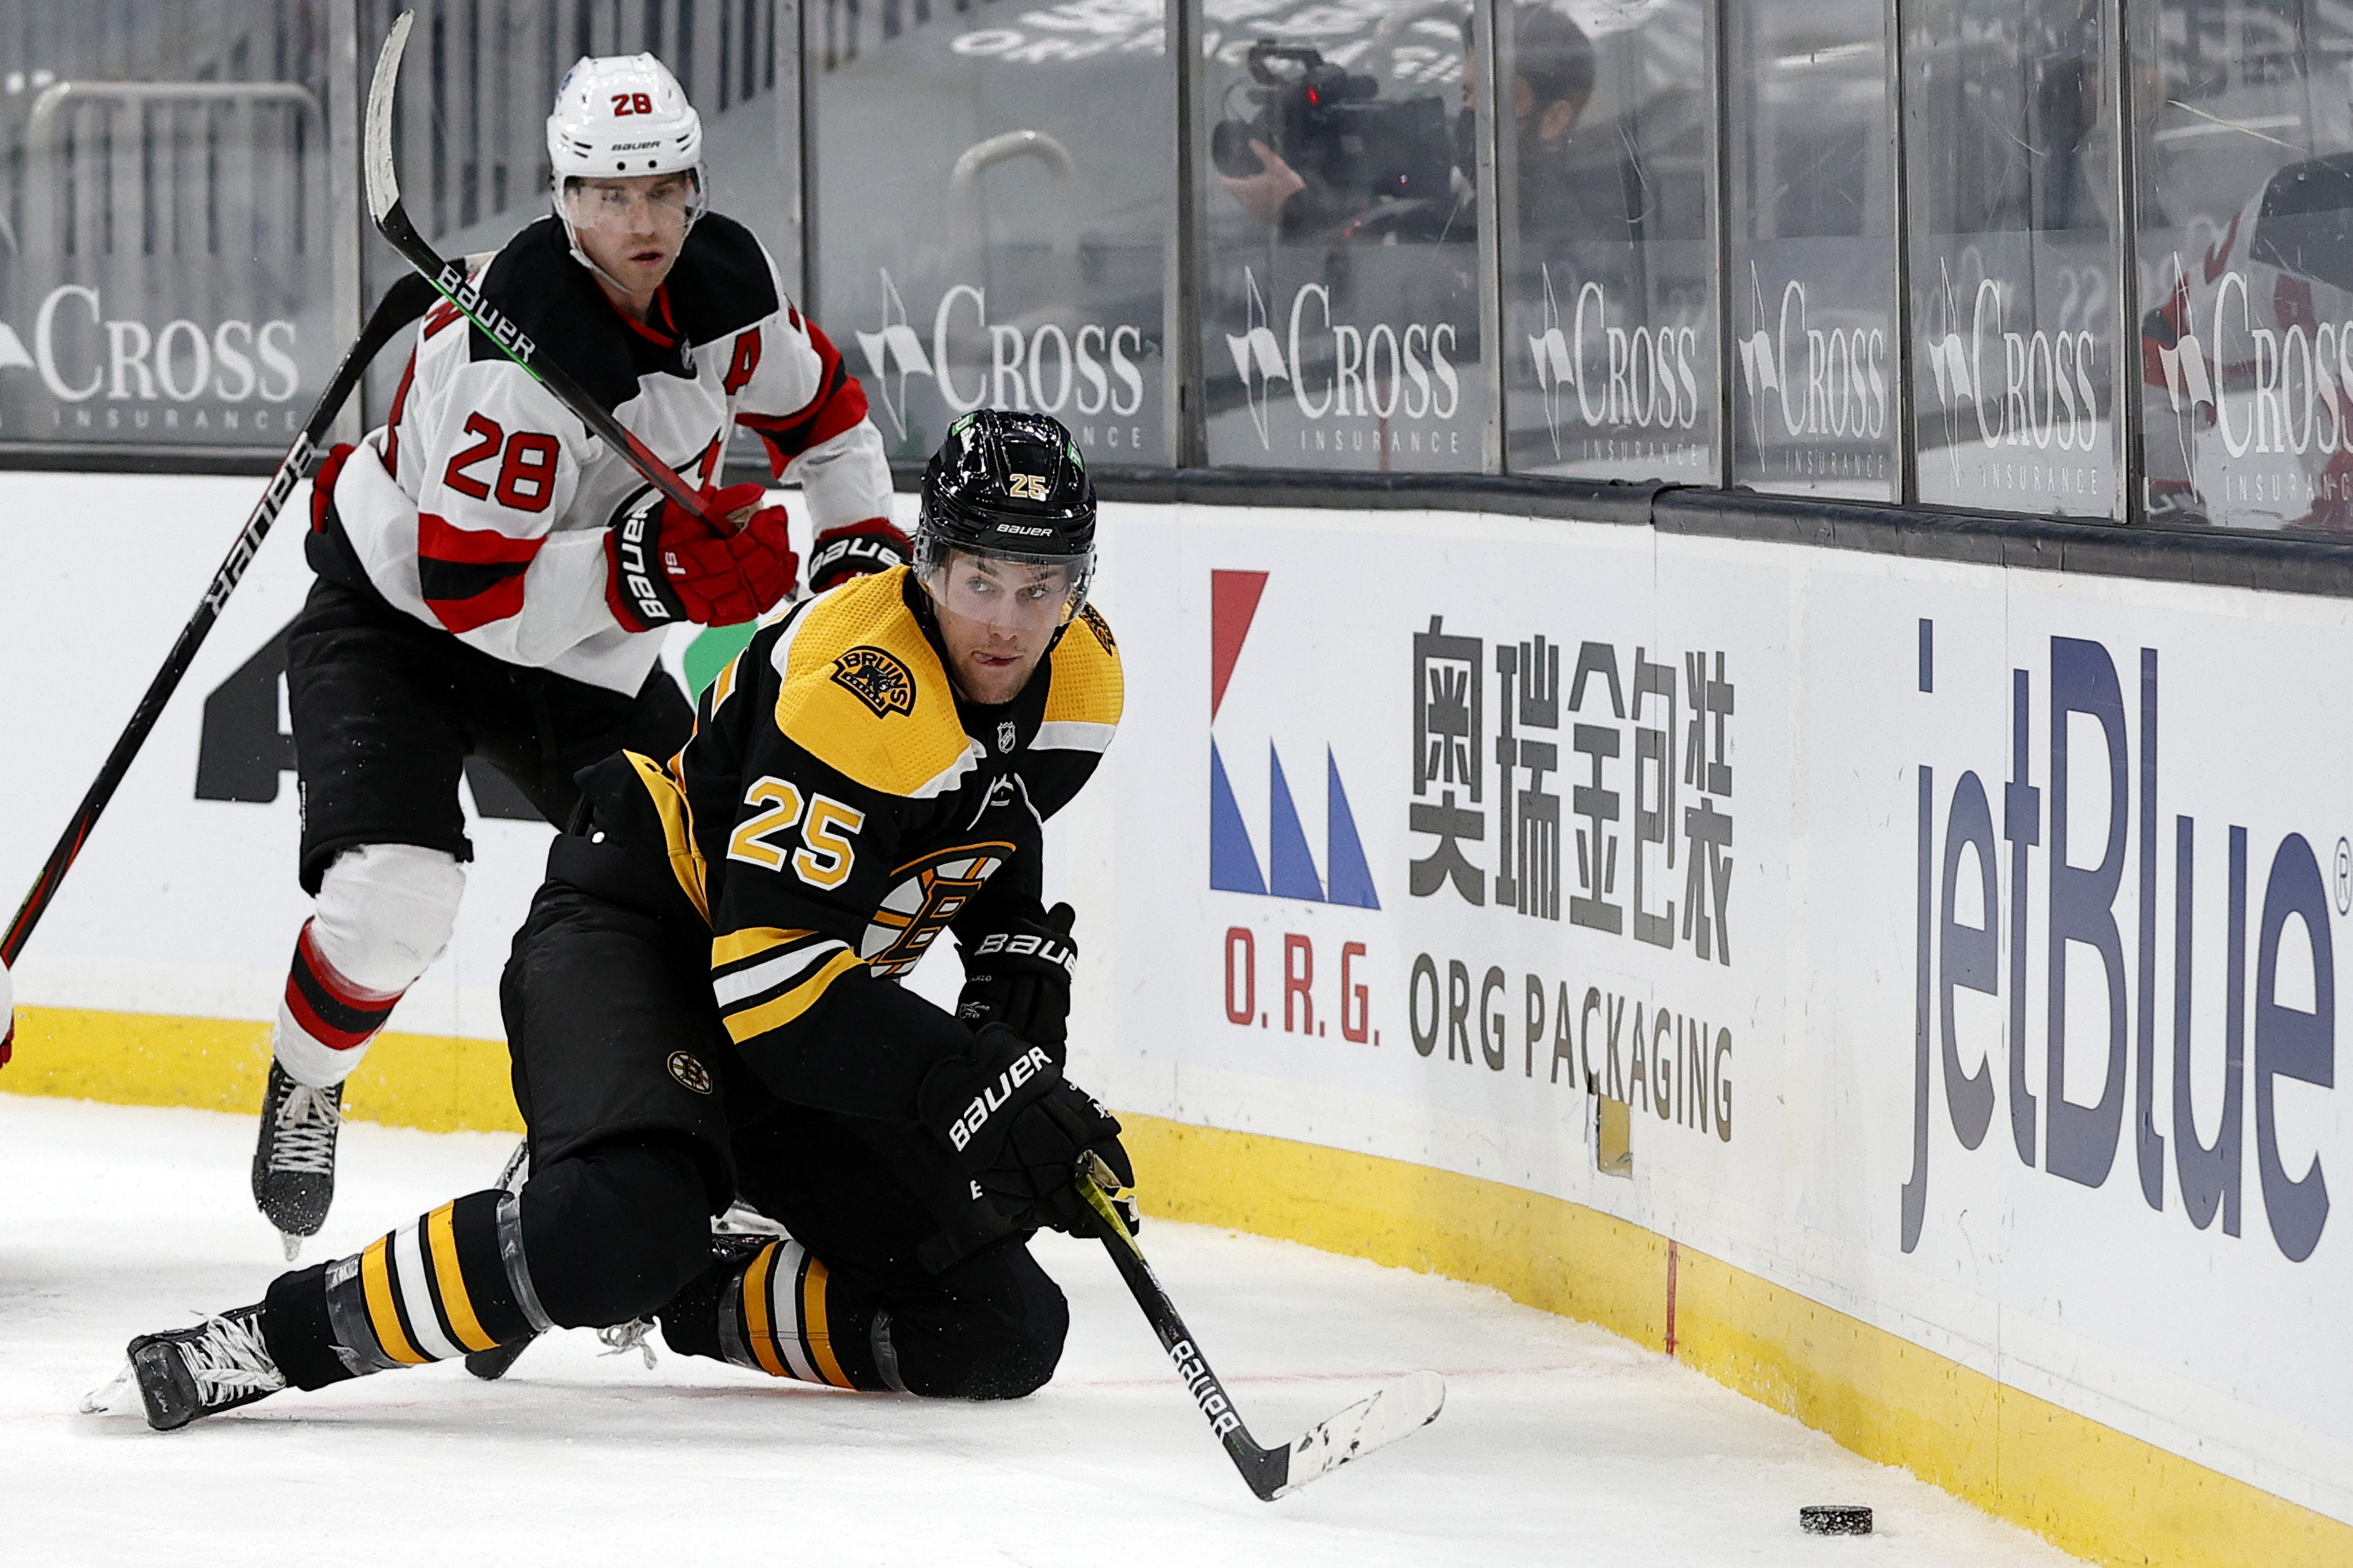 Bruins' Marchand, Carlo returning to lineup vs. Devils